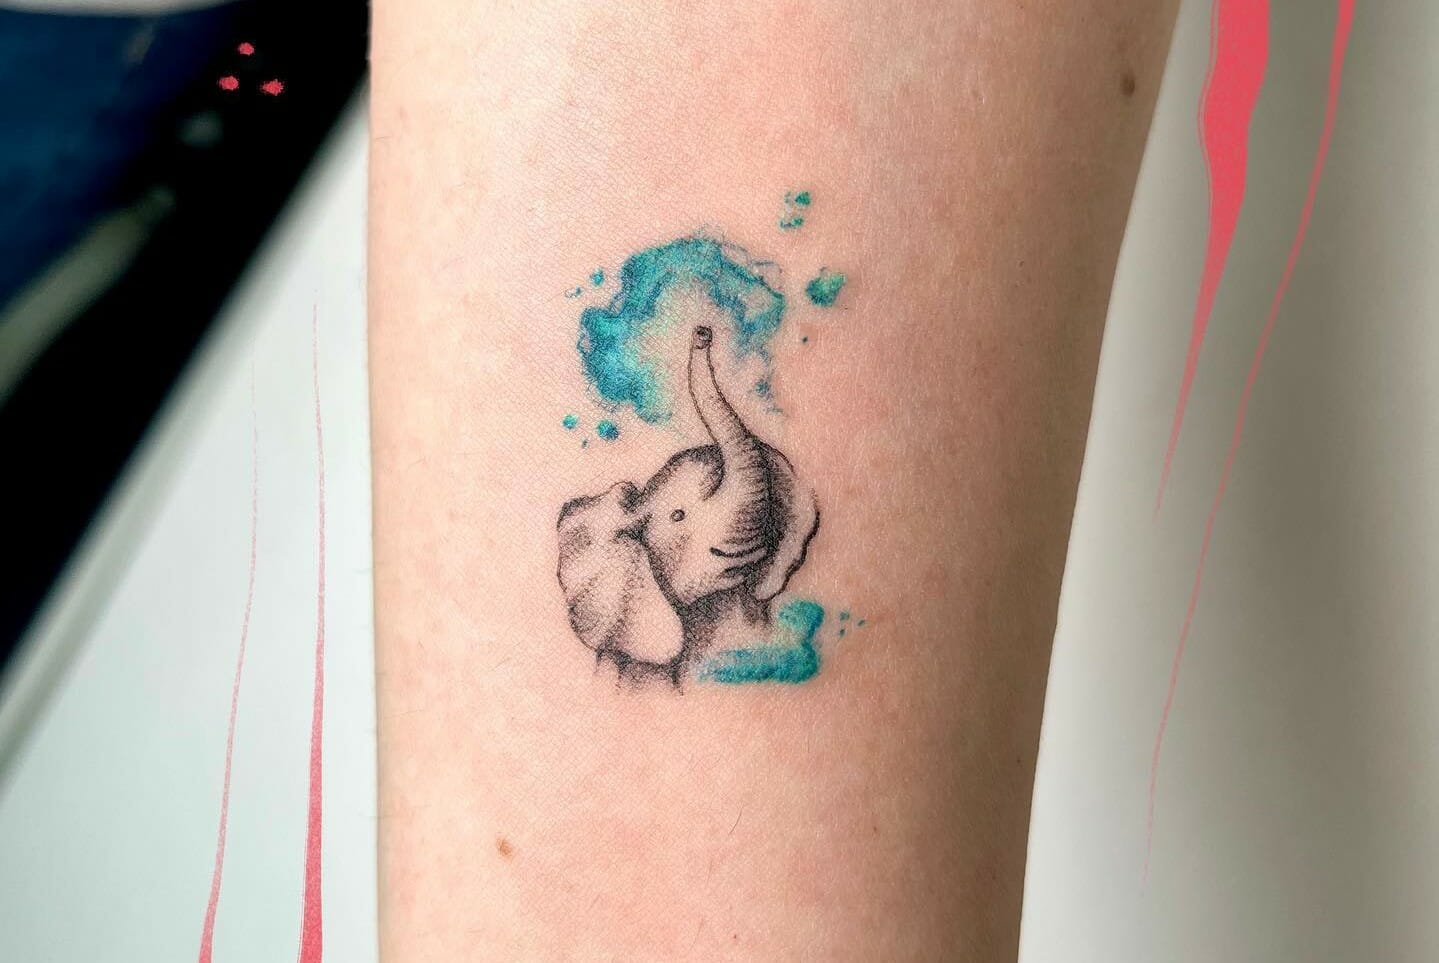 Funhouse Tattoos - Elephant hand tattoo done by @h2ink . . . #tattoo # tattoos #tattooed #tattooshop #handtattoo #elephant #elephanttattoo  #blackandgreytattoo #colortattoo | Facebook